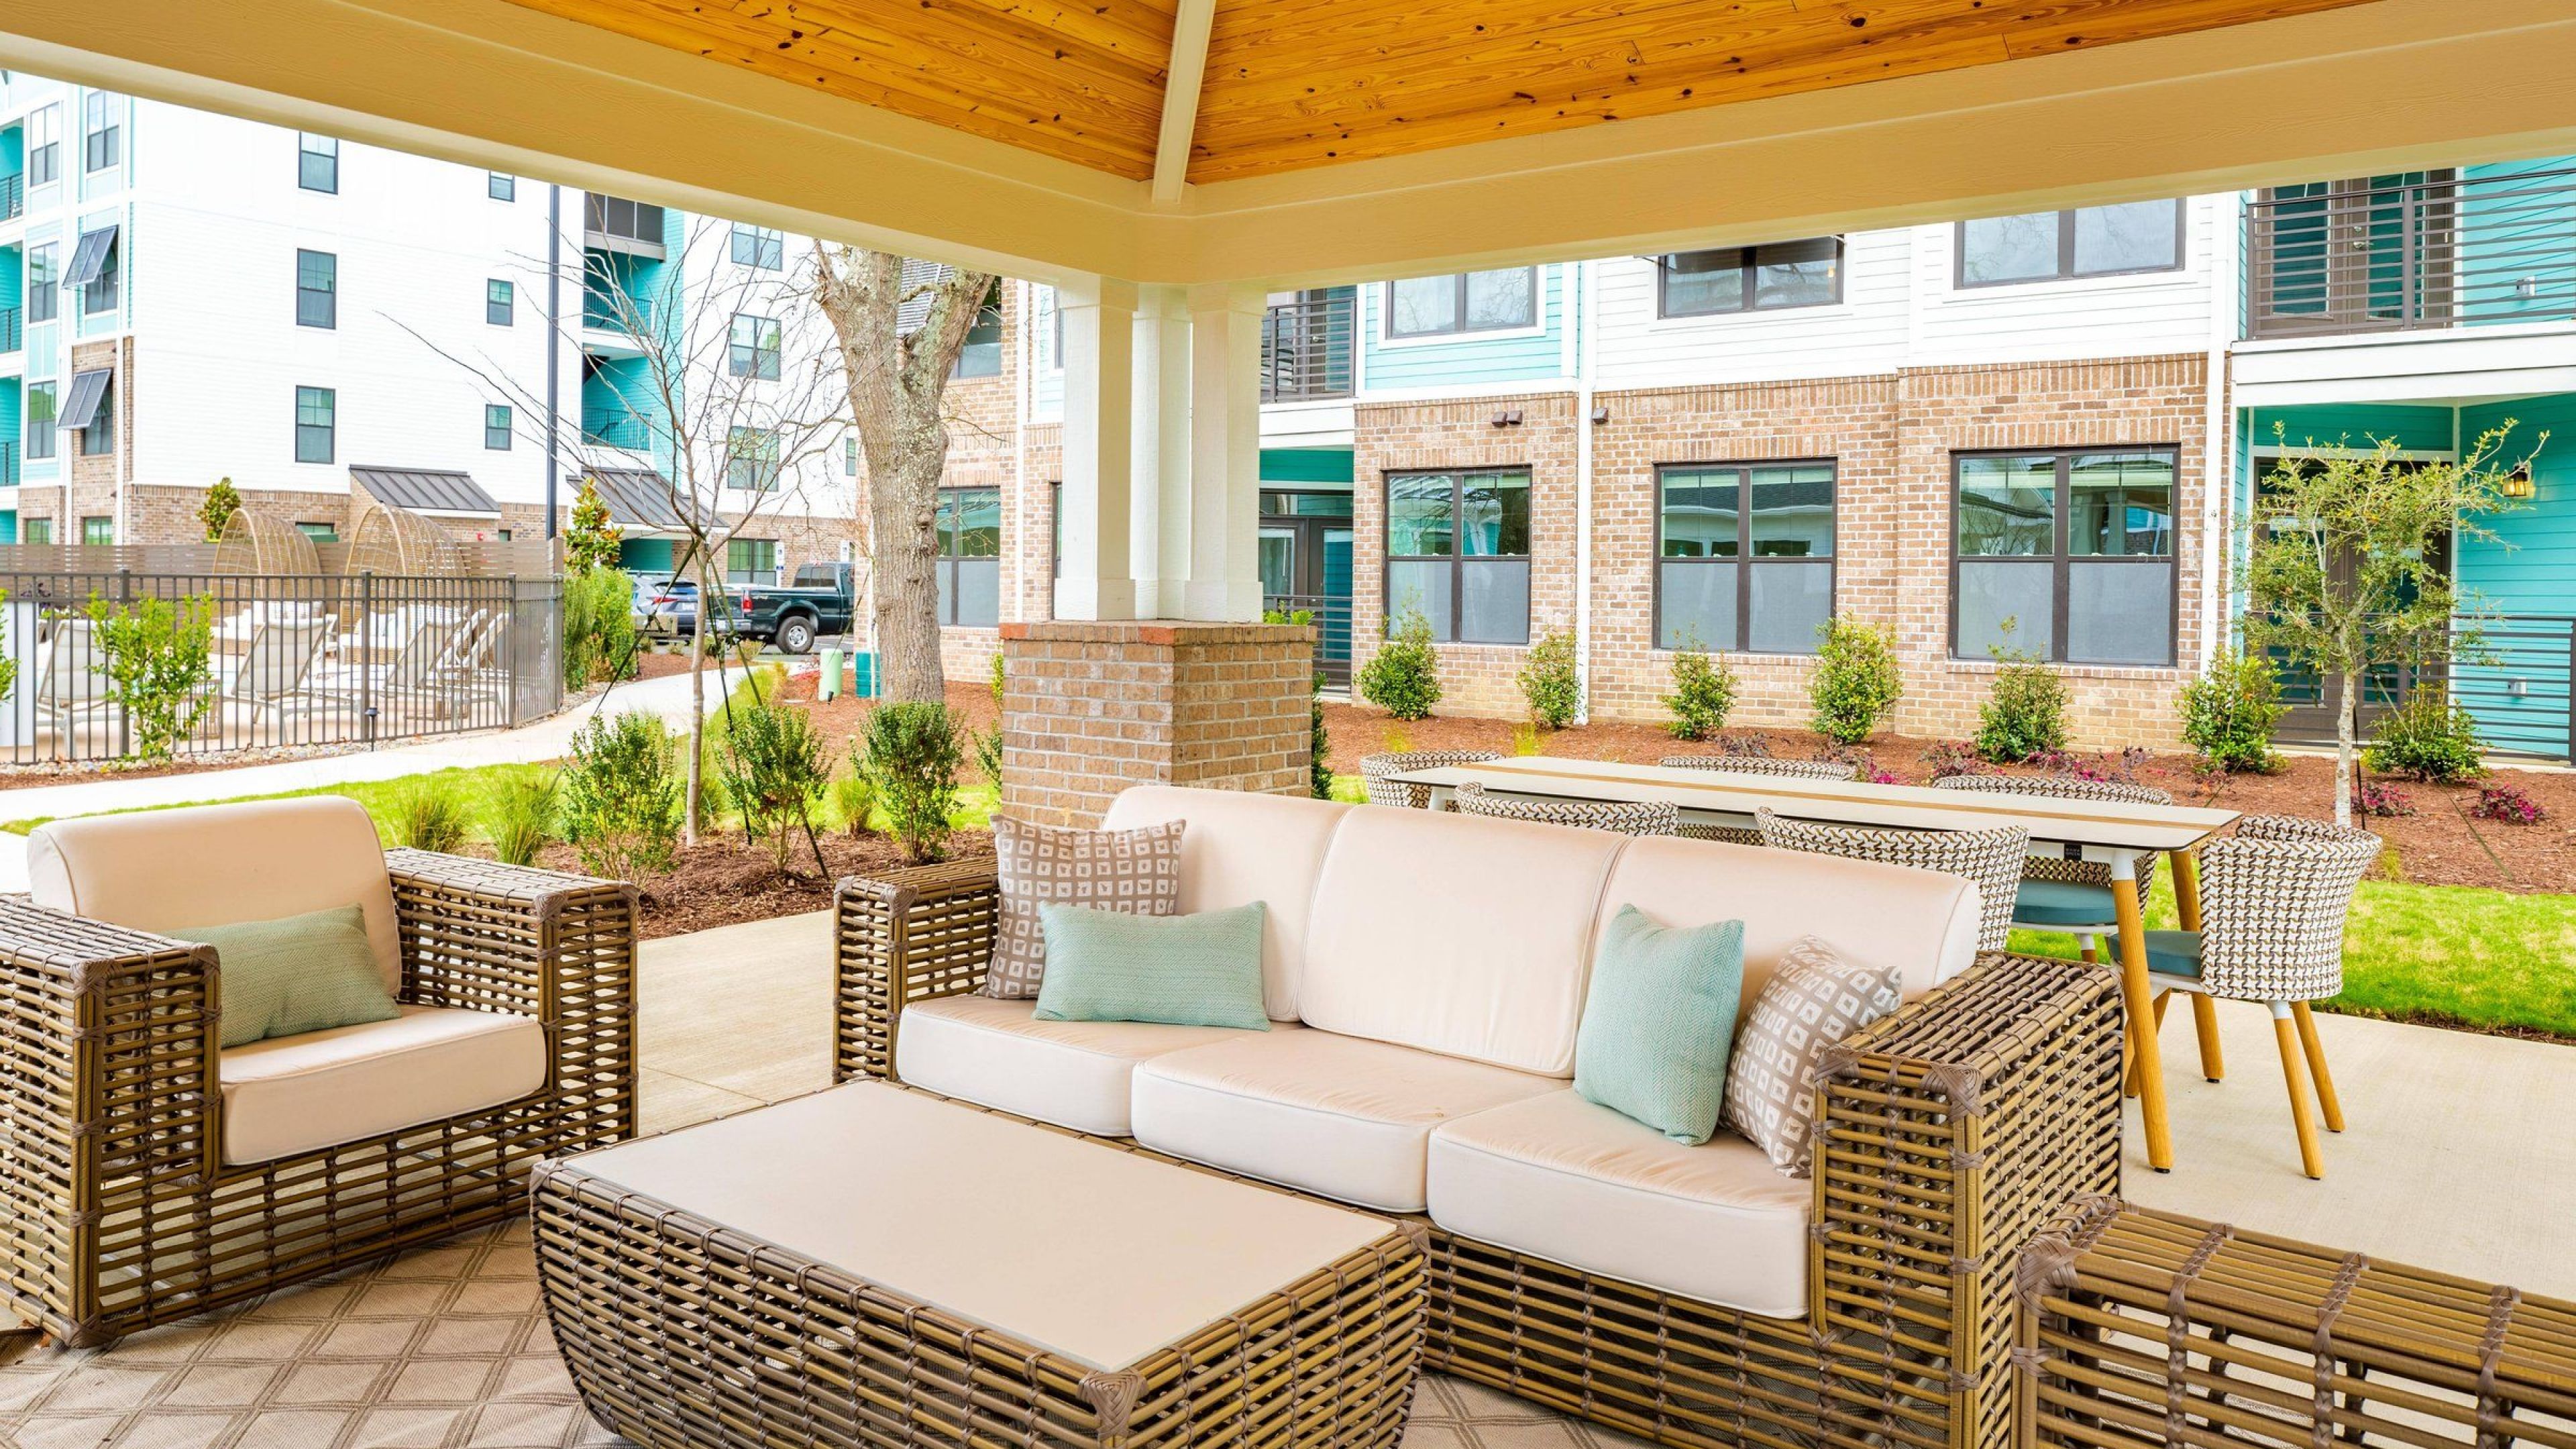 Hawthorne at Oleander outdoor pavilion with lounge seating overlooking an outdoor pool